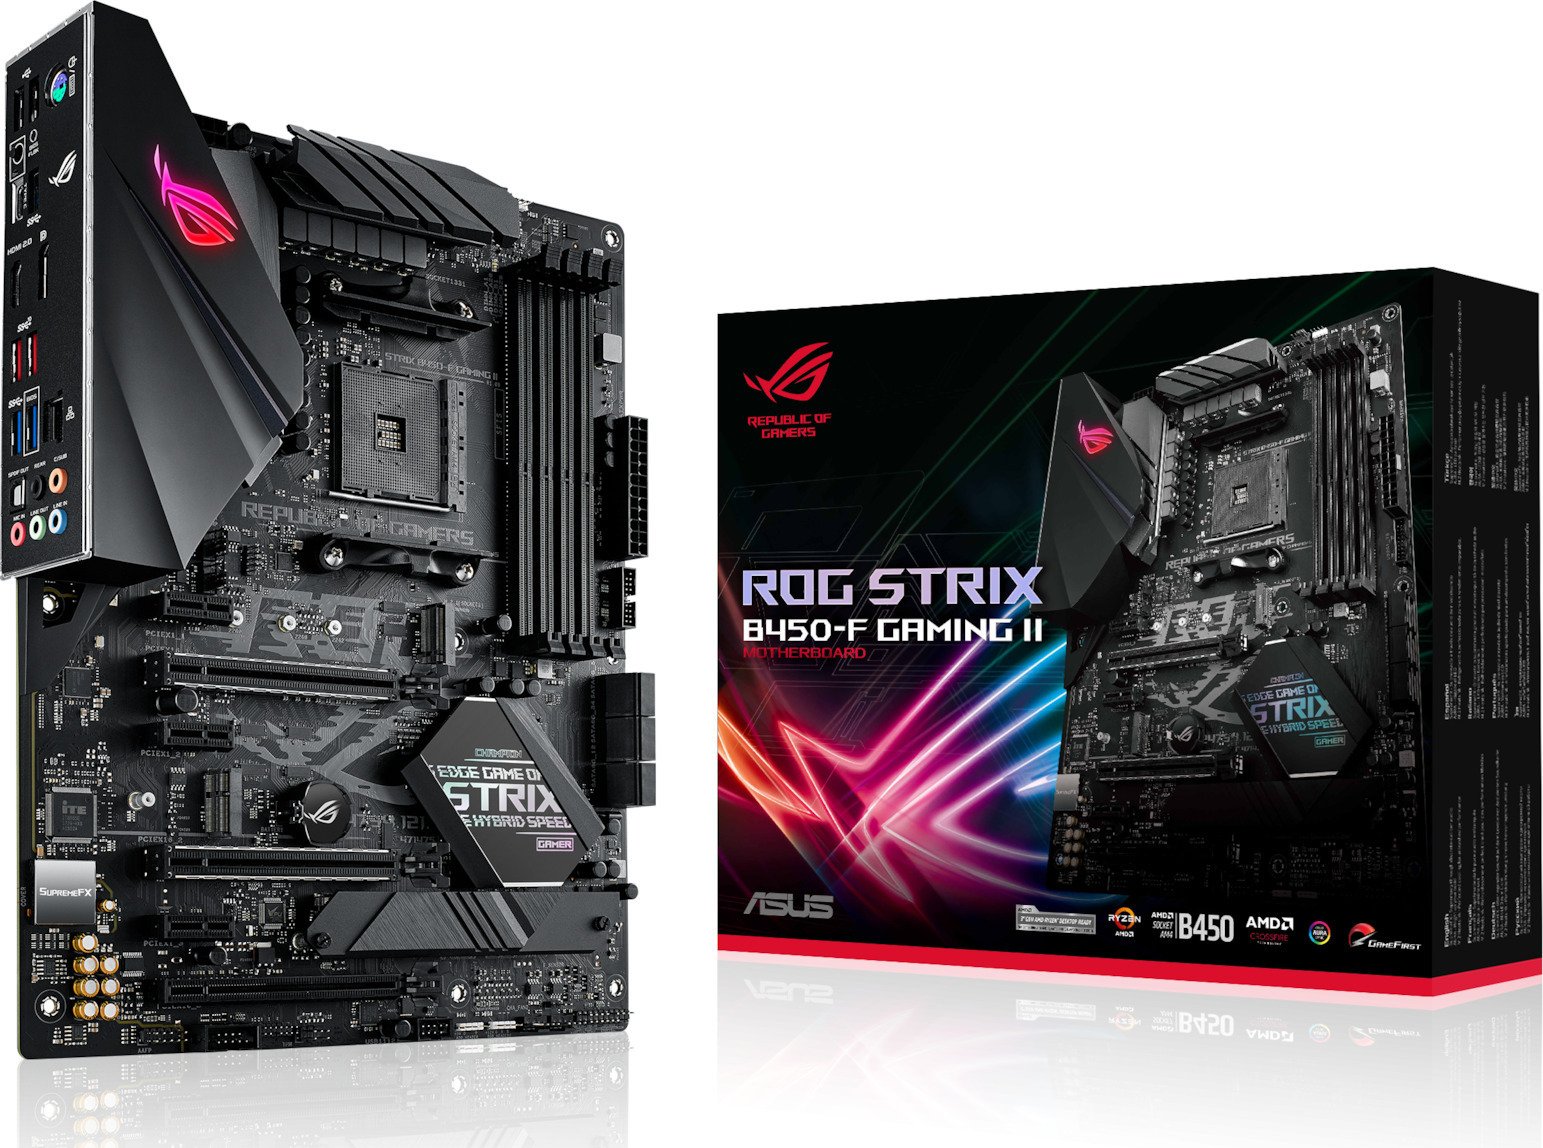 More information about "Asus Rog Strix B450-F Gaming II ολοκαινουρια"